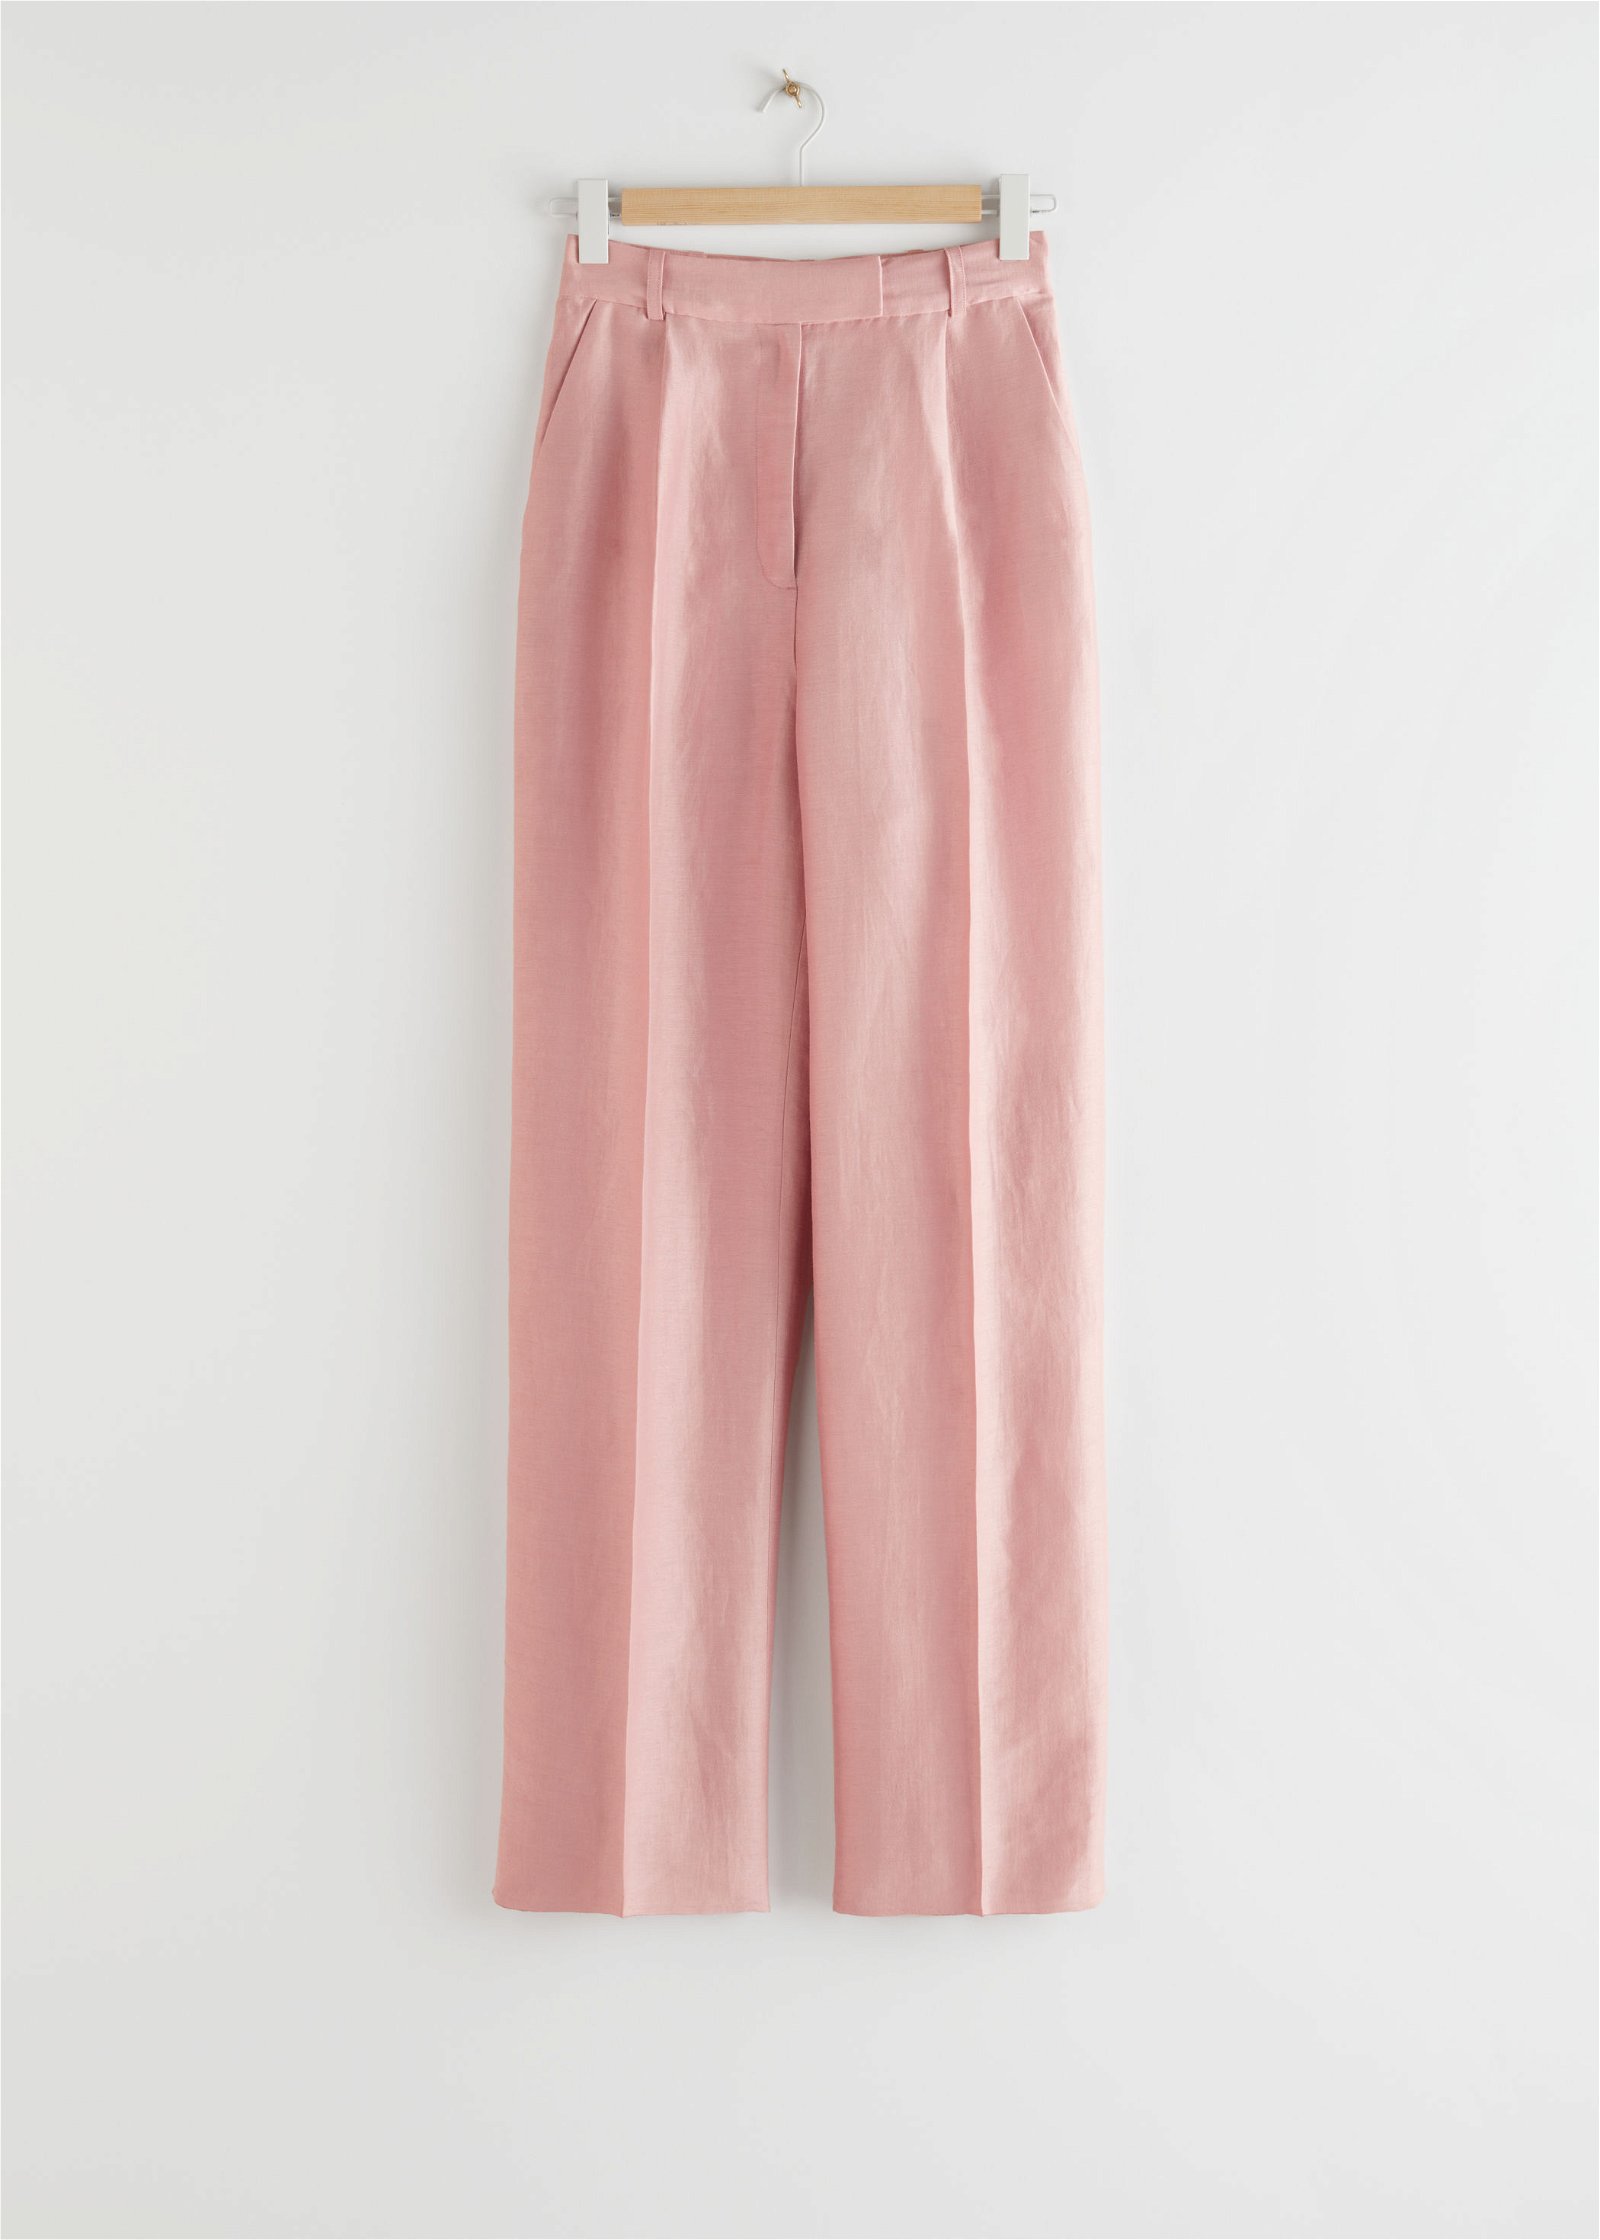 & OTHER STORIES Loose Tapered Linen Blend Trousers in Dusty Pink | Endource